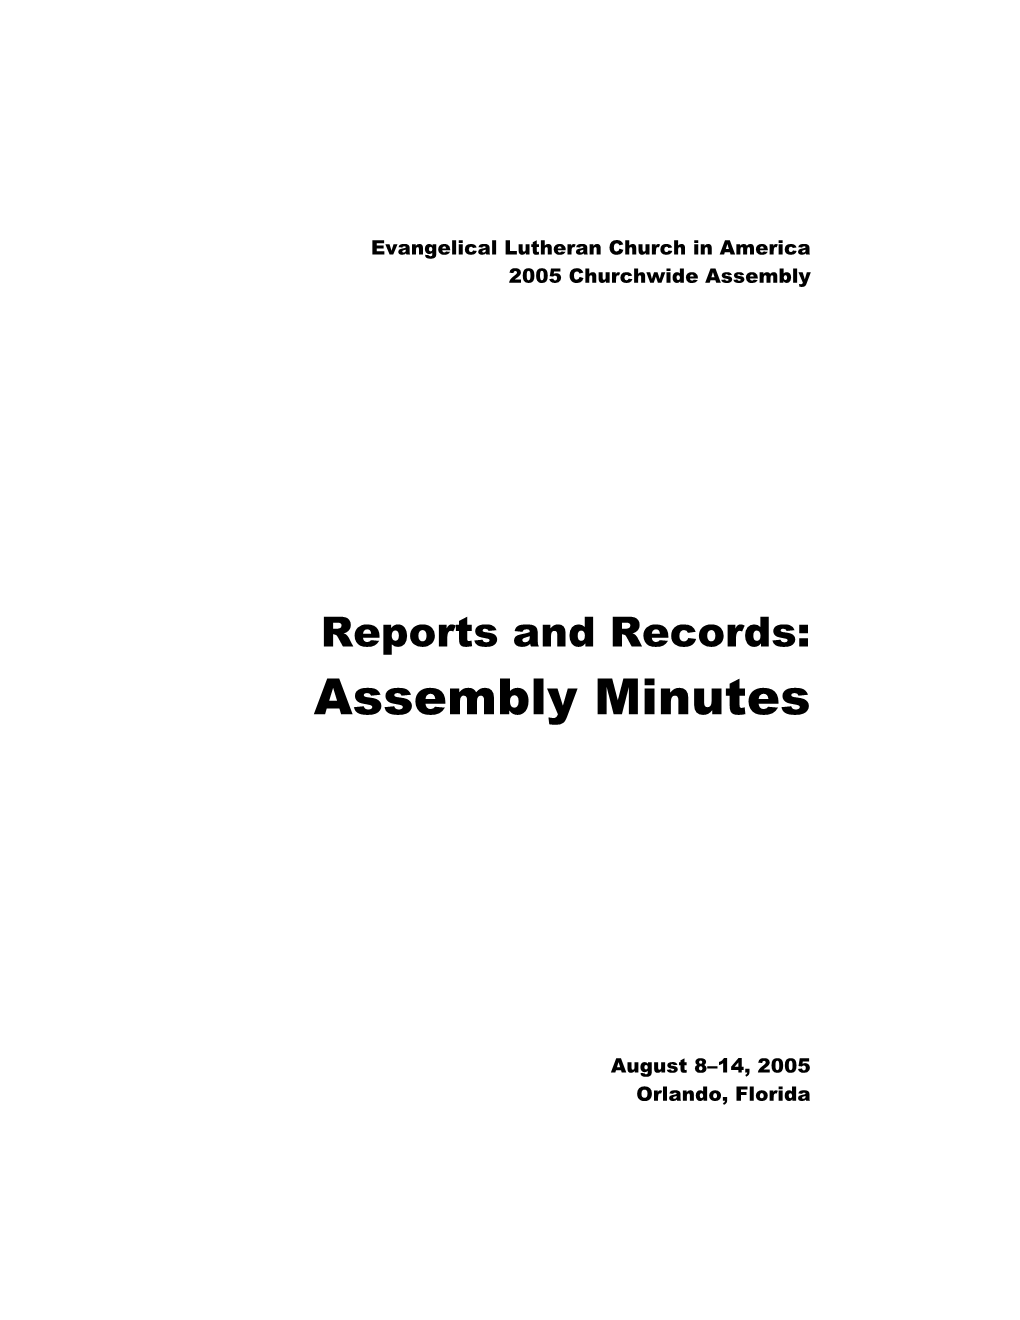 Reports and Records: Assembly Minutes